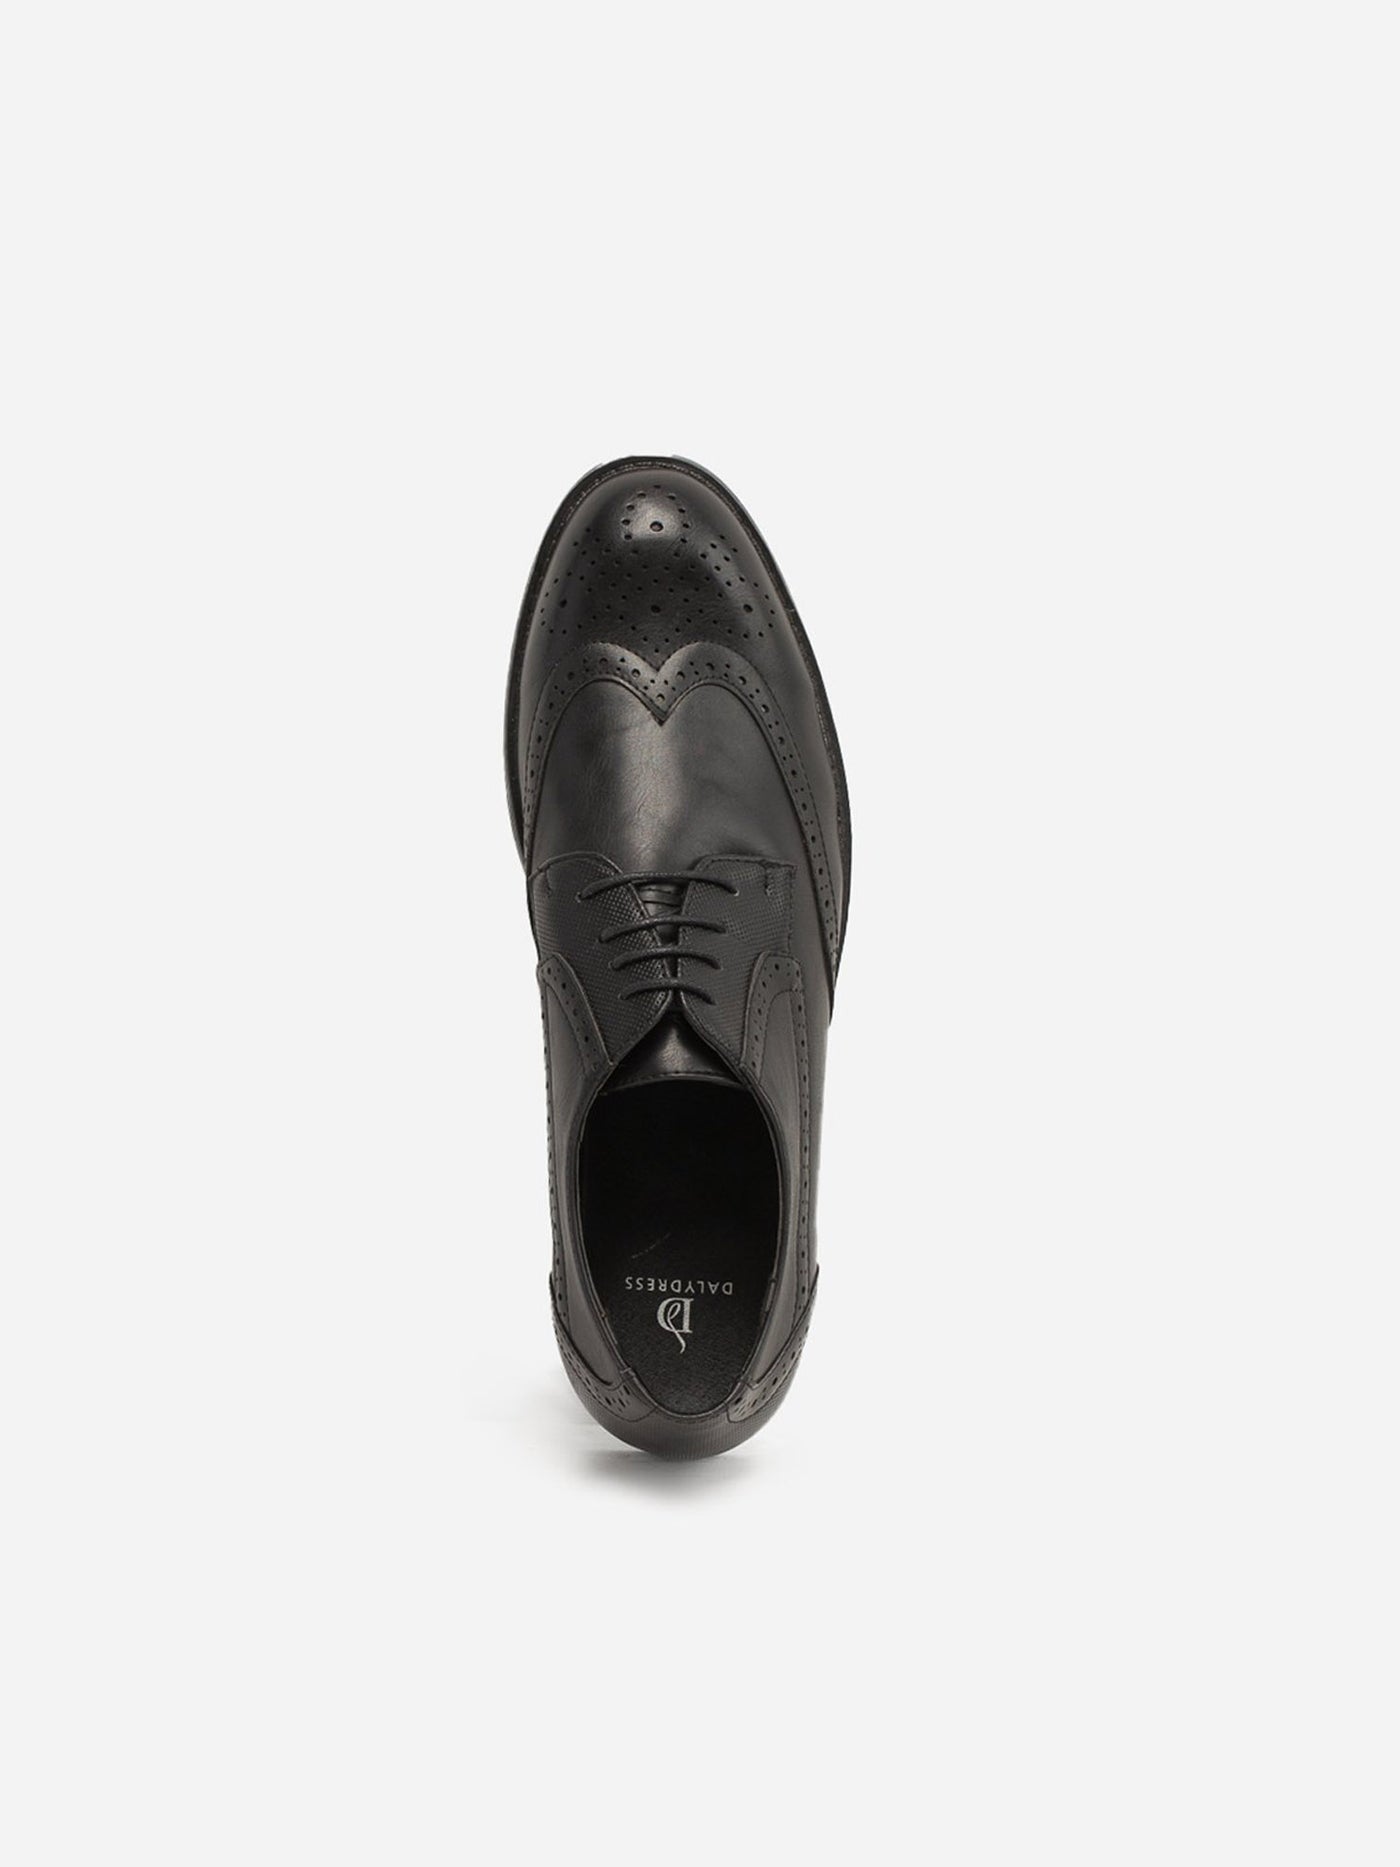 Daly Dress Mens Lace-up Classic Shoes